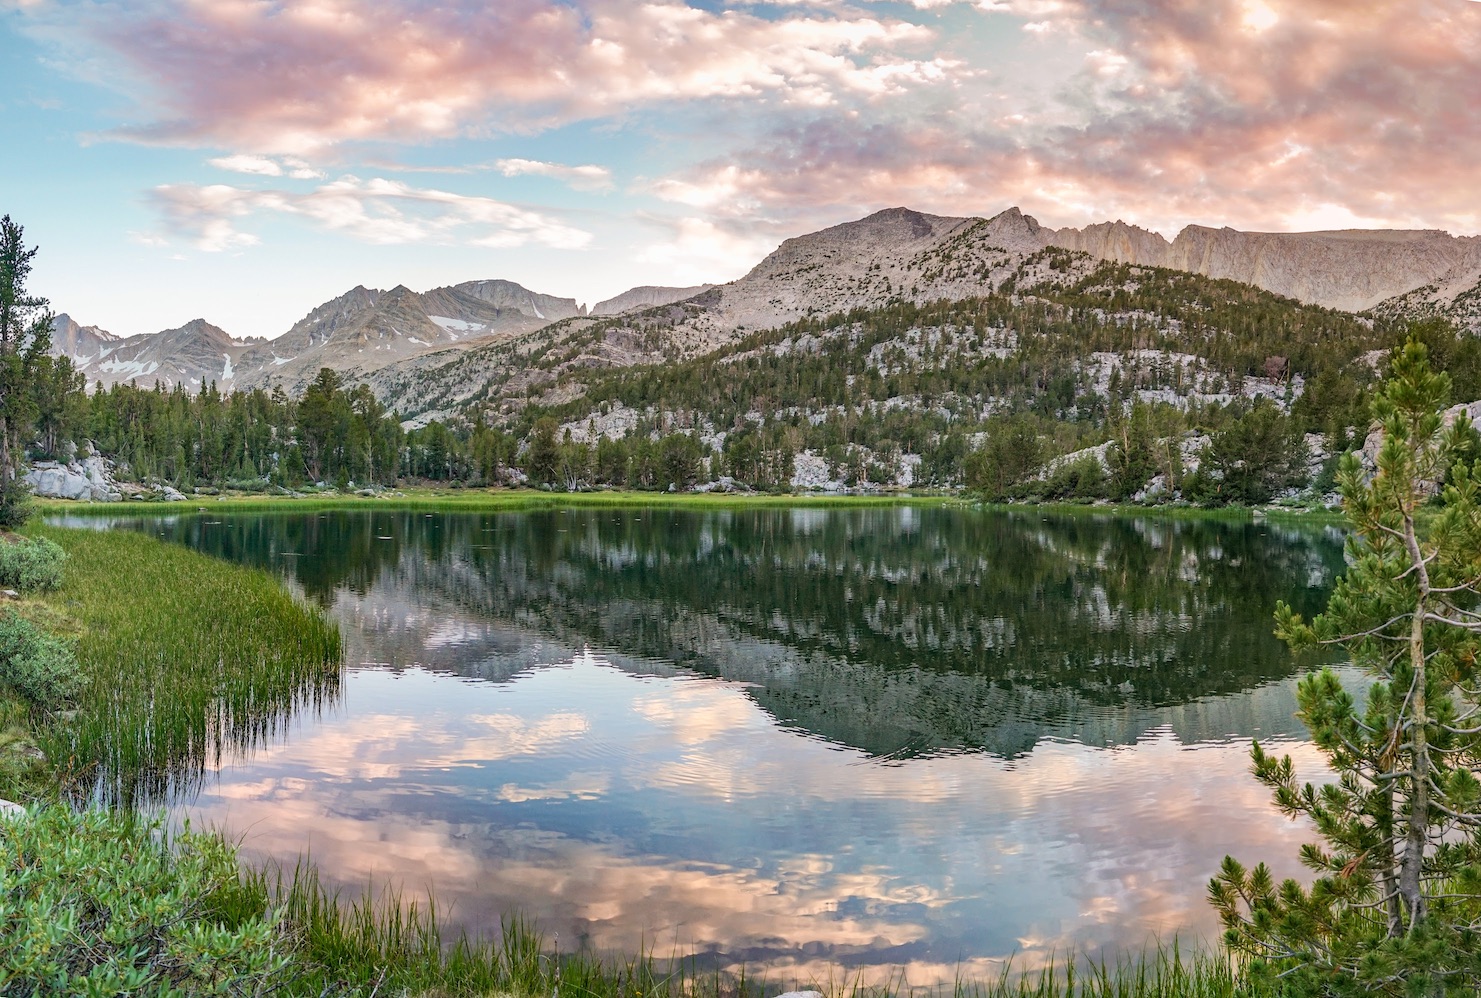 A sunset sky reflects in an alpine lake surrounded by pine trees and mountains in Sequoia and Kings Canyon National Park